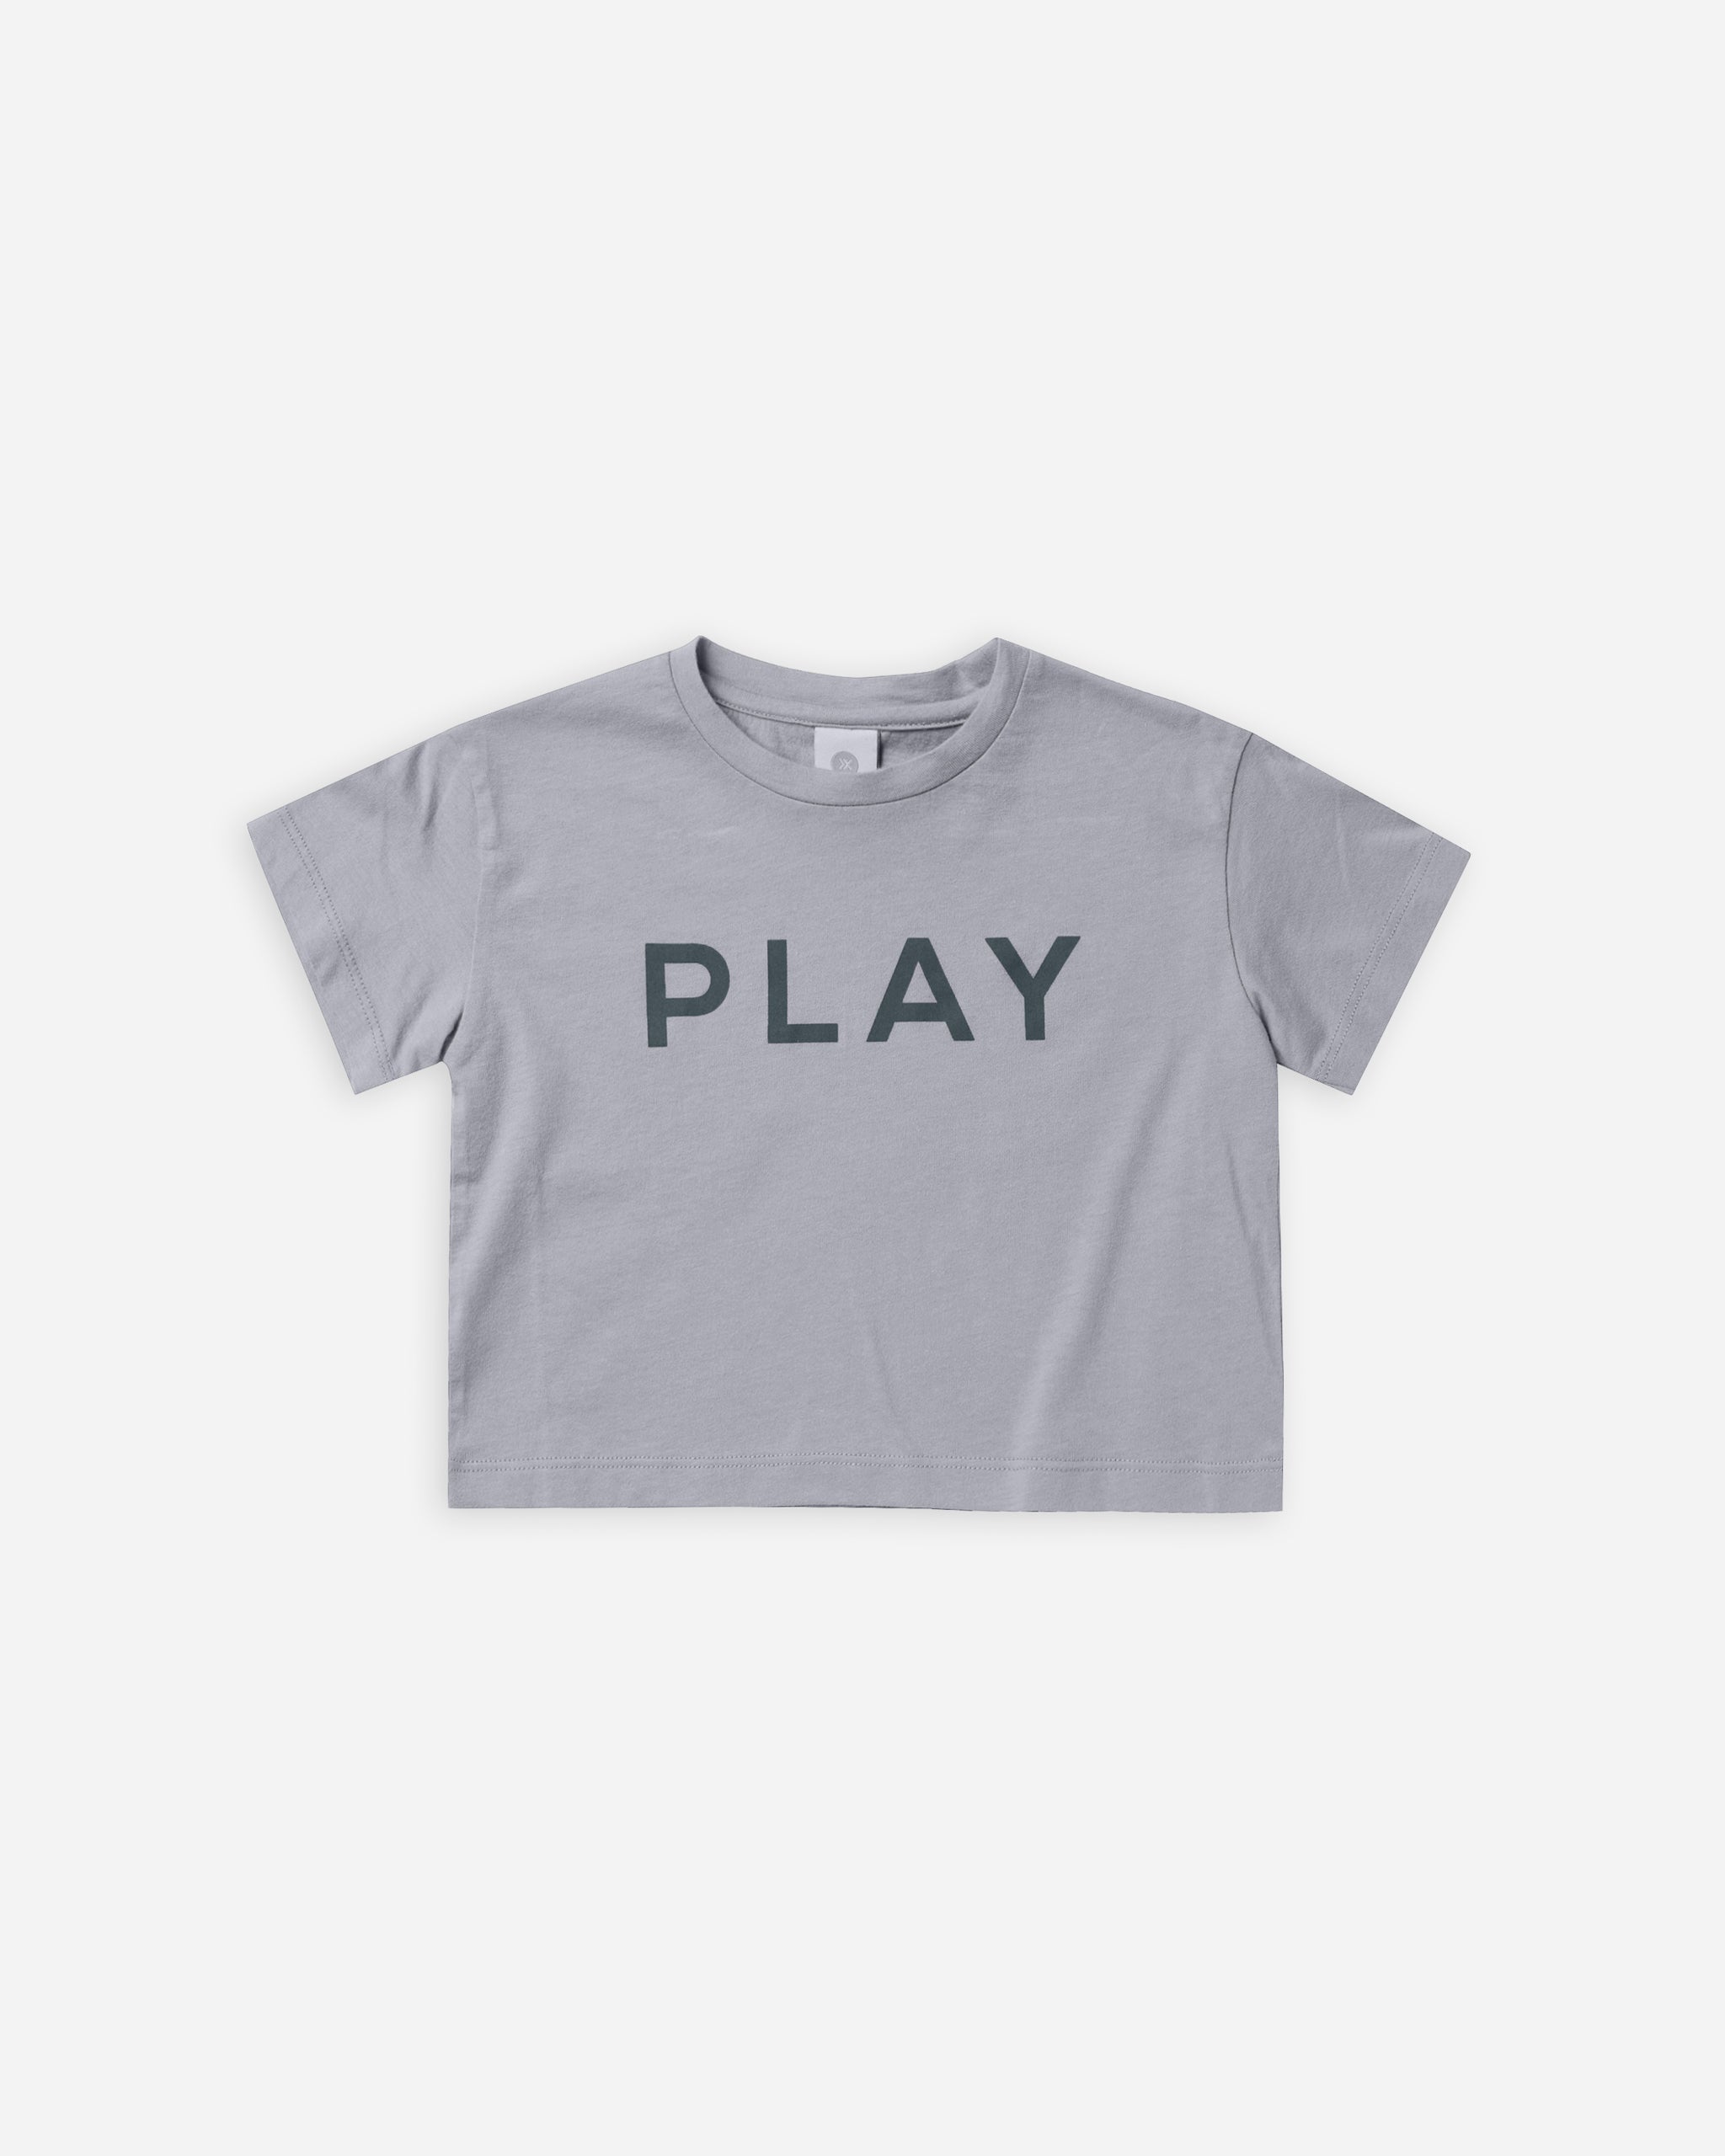 Solana Tee | Periwinkle - Rylee + Cru | Kids Clothes | Trendy Baby Clothes | Modern Infant Outfits |